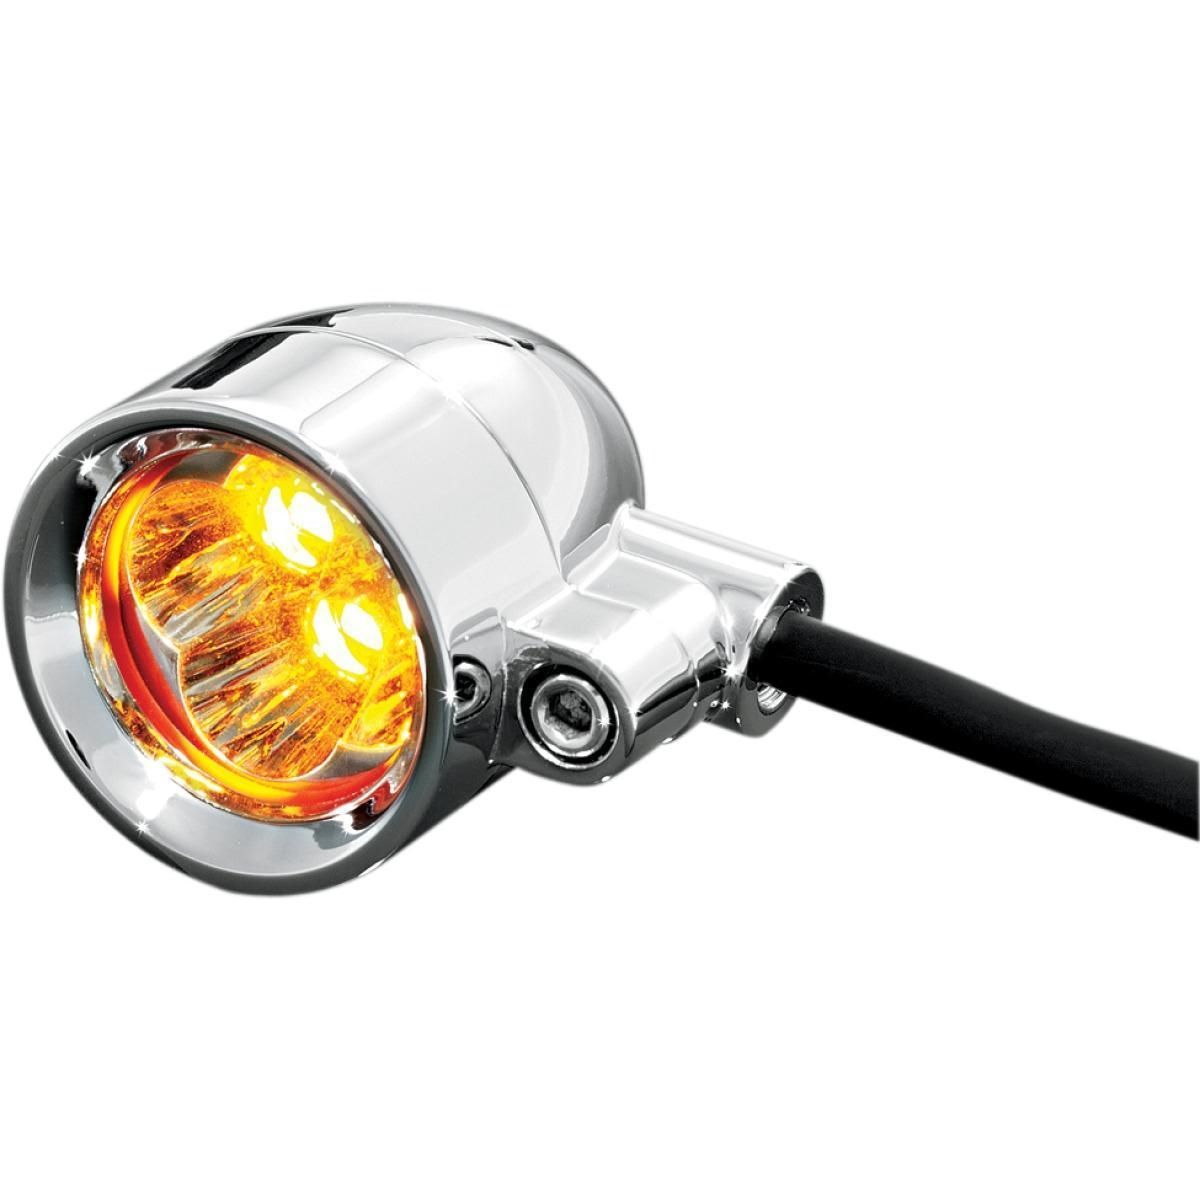 25FD-KURYAKYN-1647 Super-Bright LED Silver Bullets with 3/8in.-16 Hollow Mounting Bolt - Dual Circuit - Red